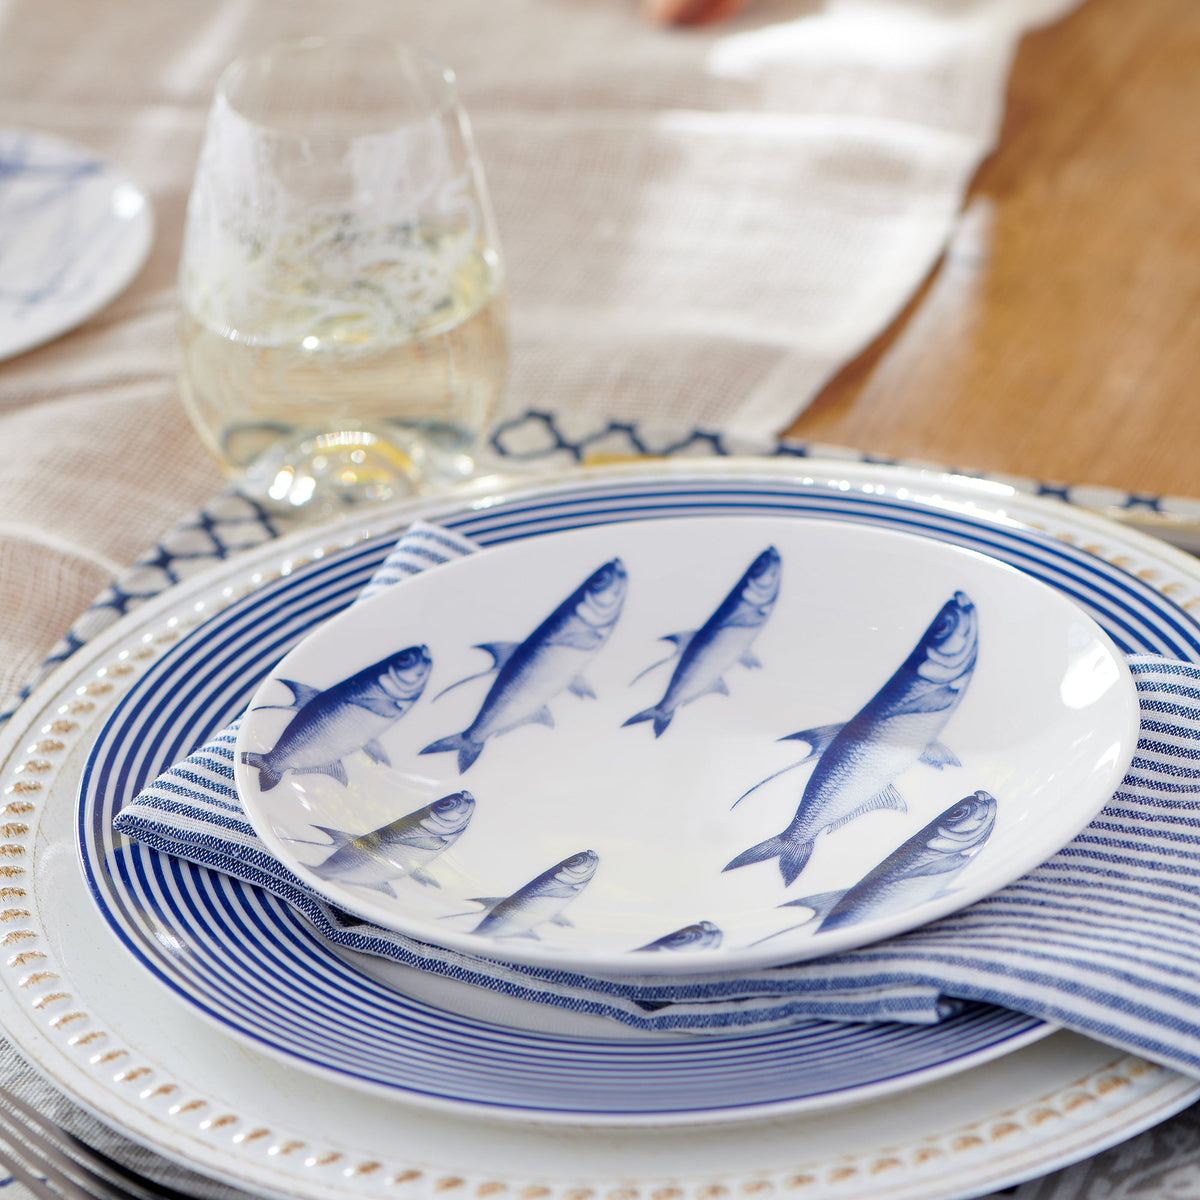 A Caskata Artisanal Home Newport Racing Stripe Rimmed Dinner Plate with fish on it.